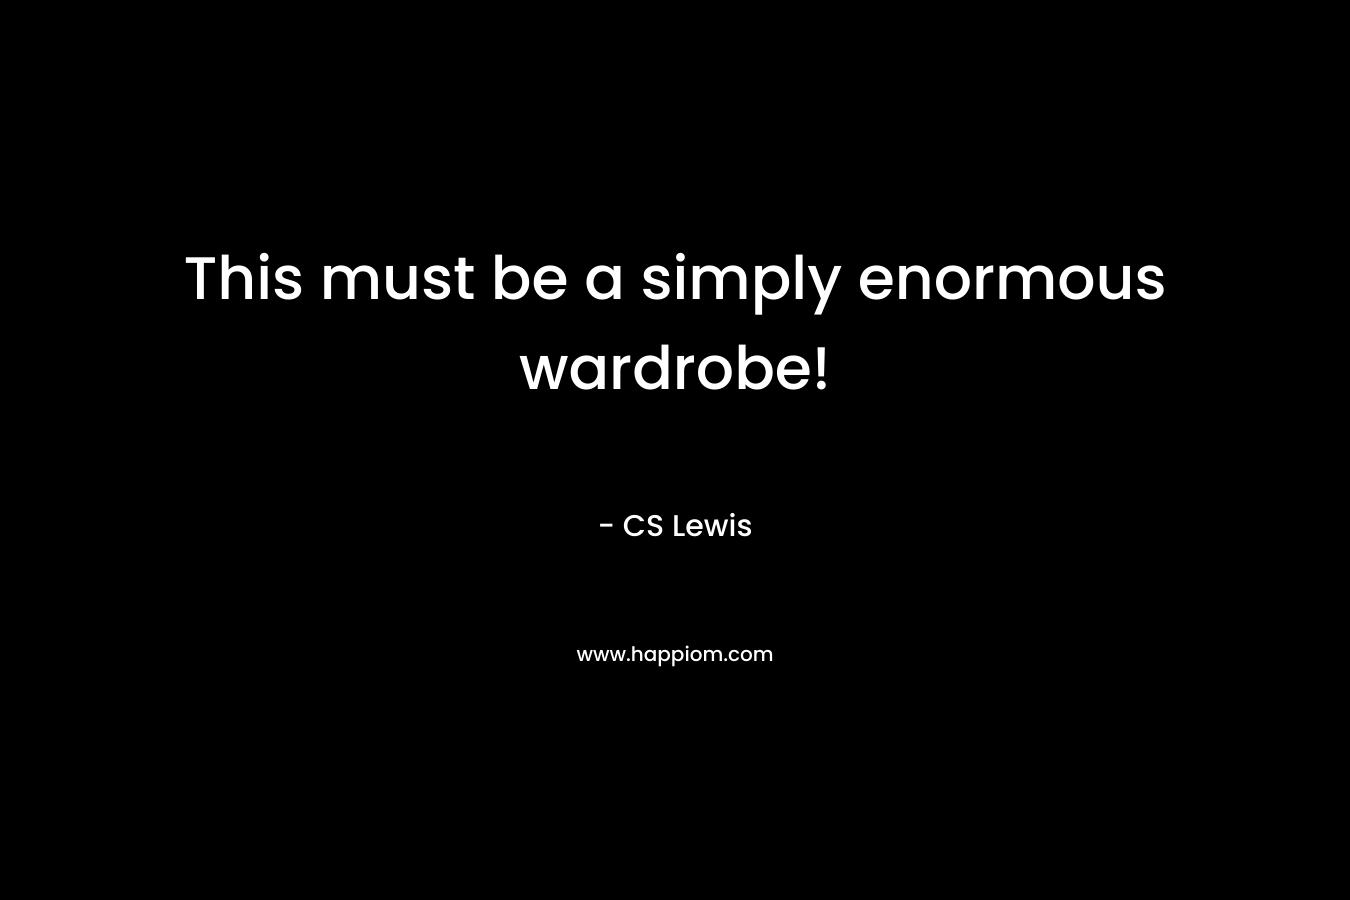 This must be a simply enormous wardrobe!